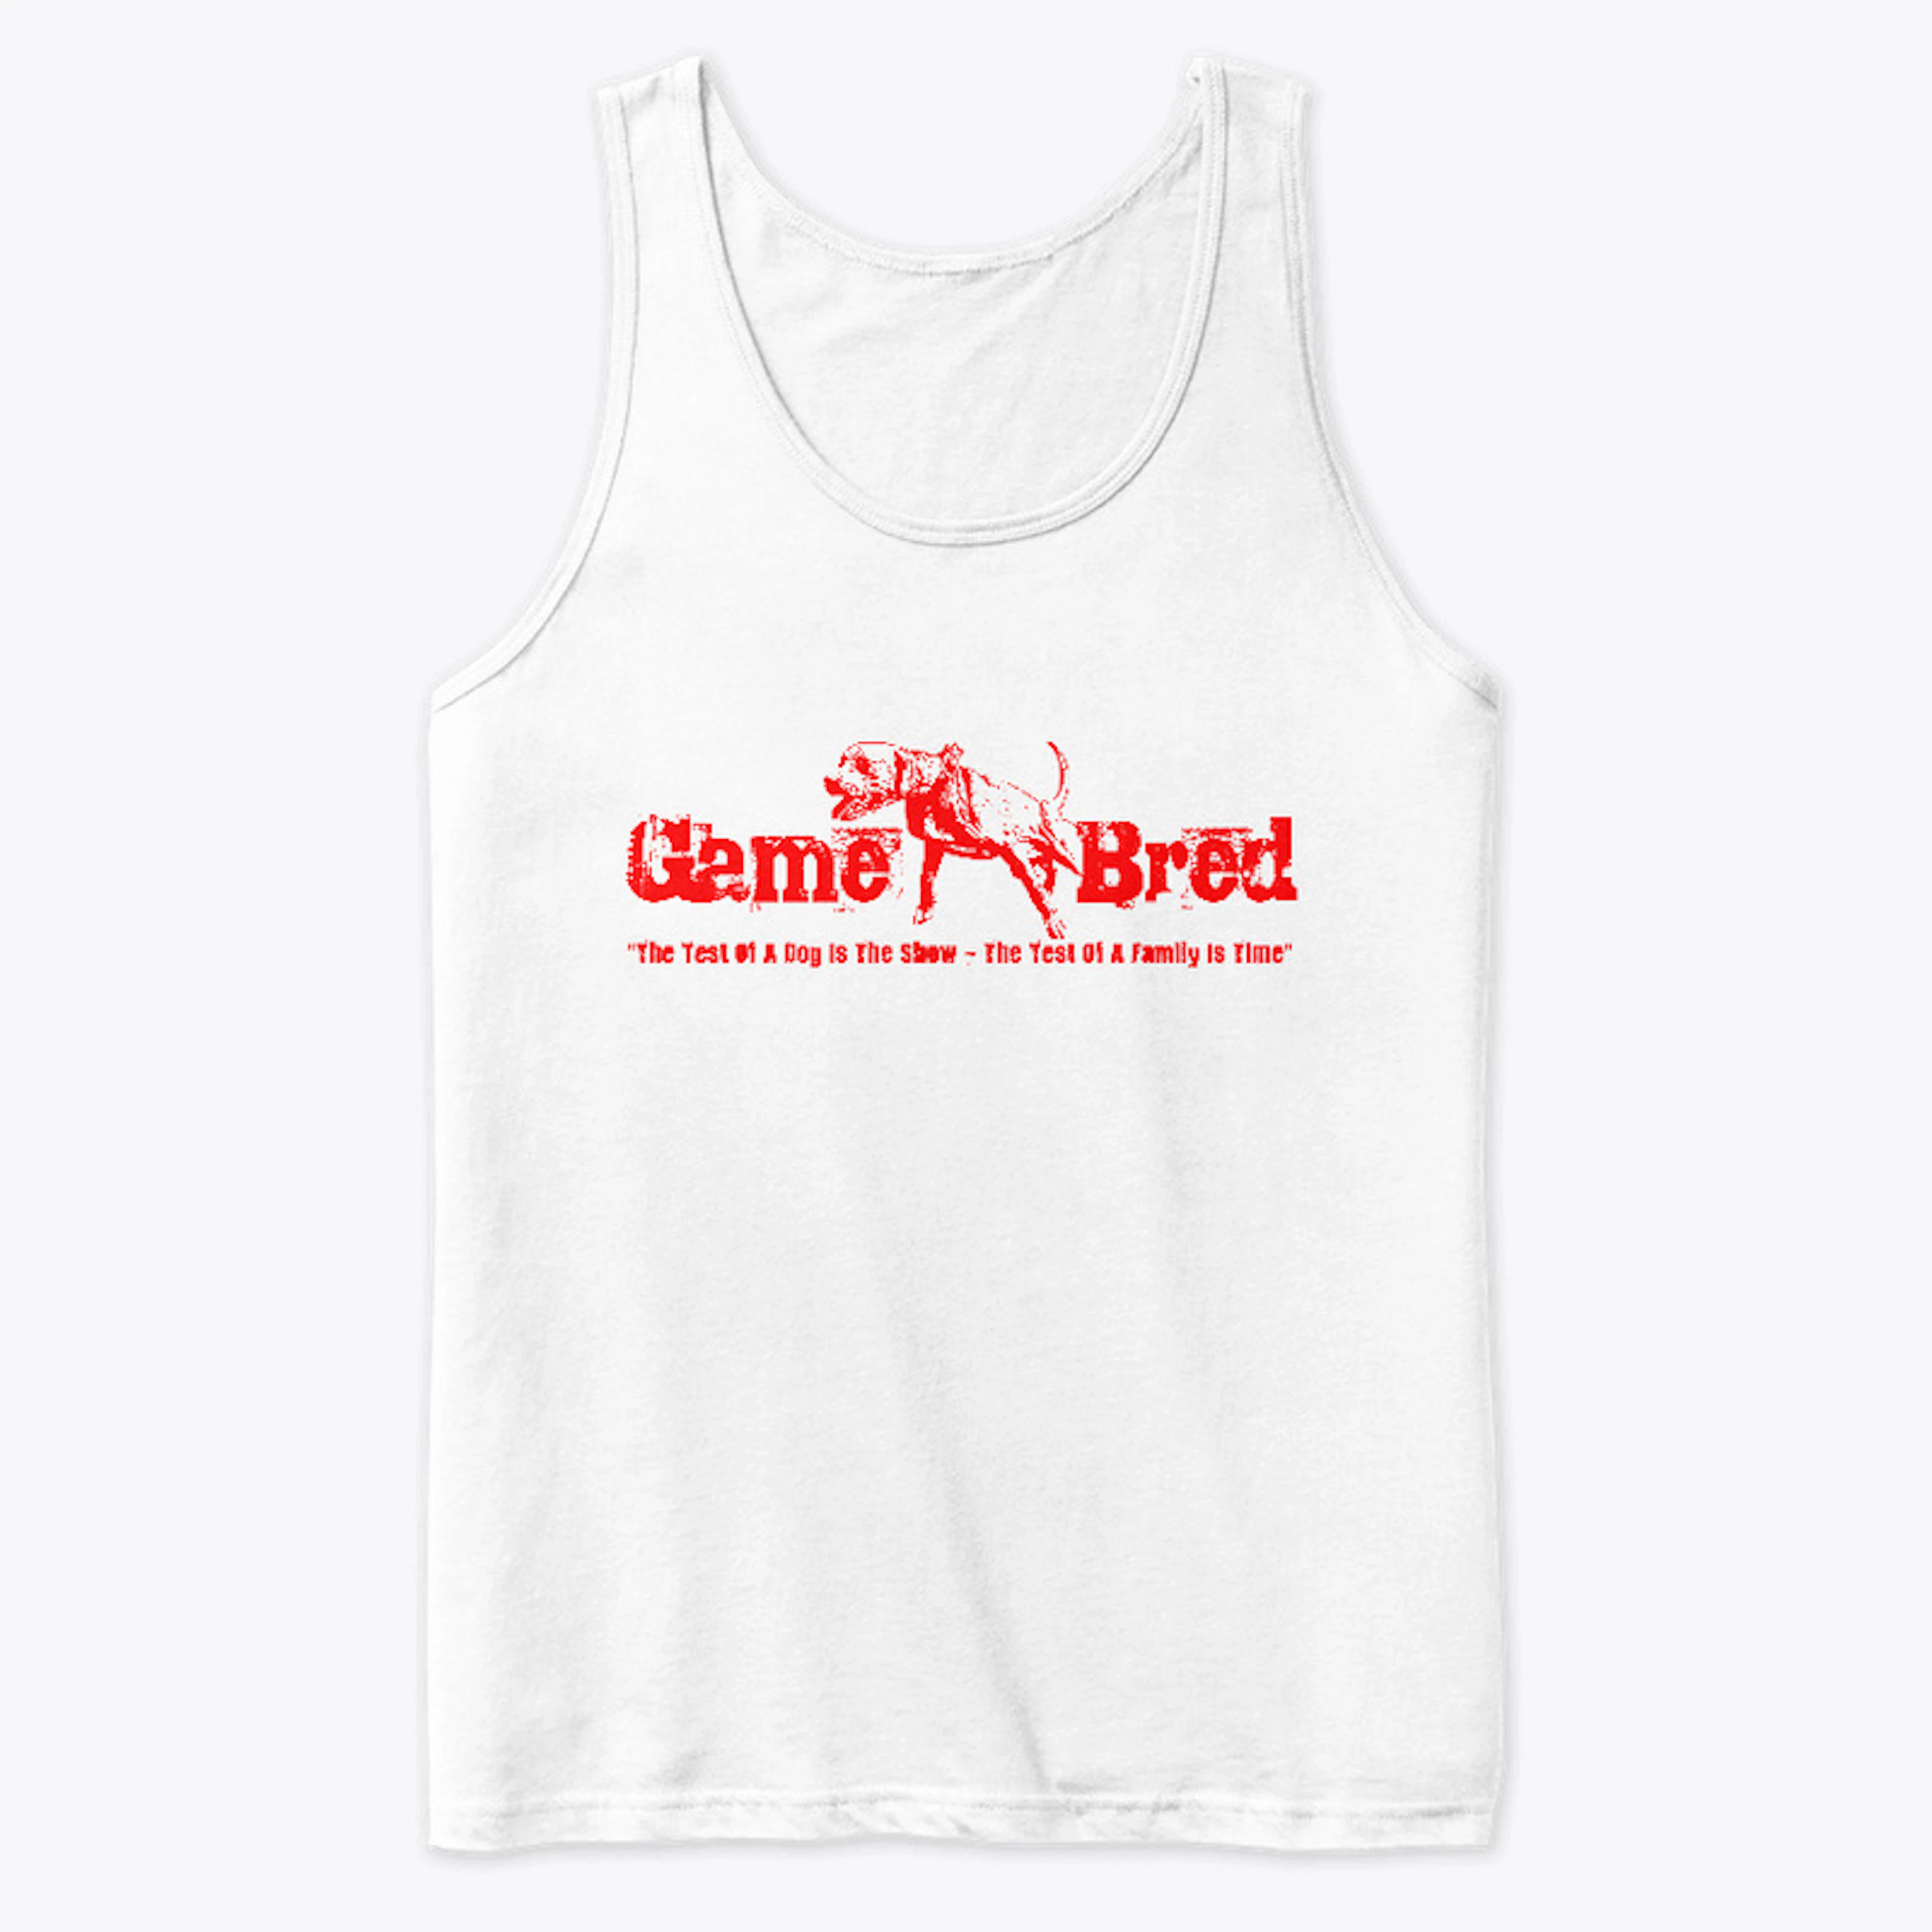 Game-Bred Tank Top